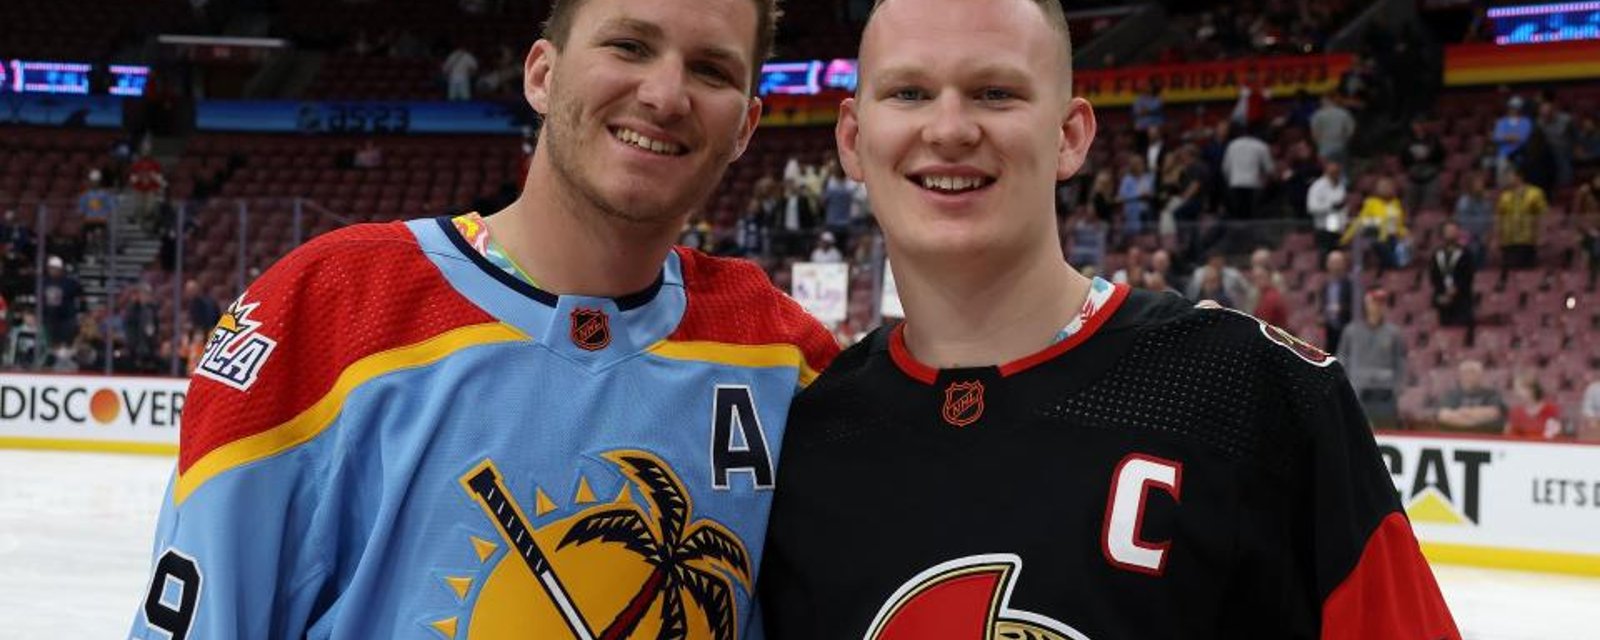 Crazy monster trade scenario emerges that would reunite the Tkachuk brothers!